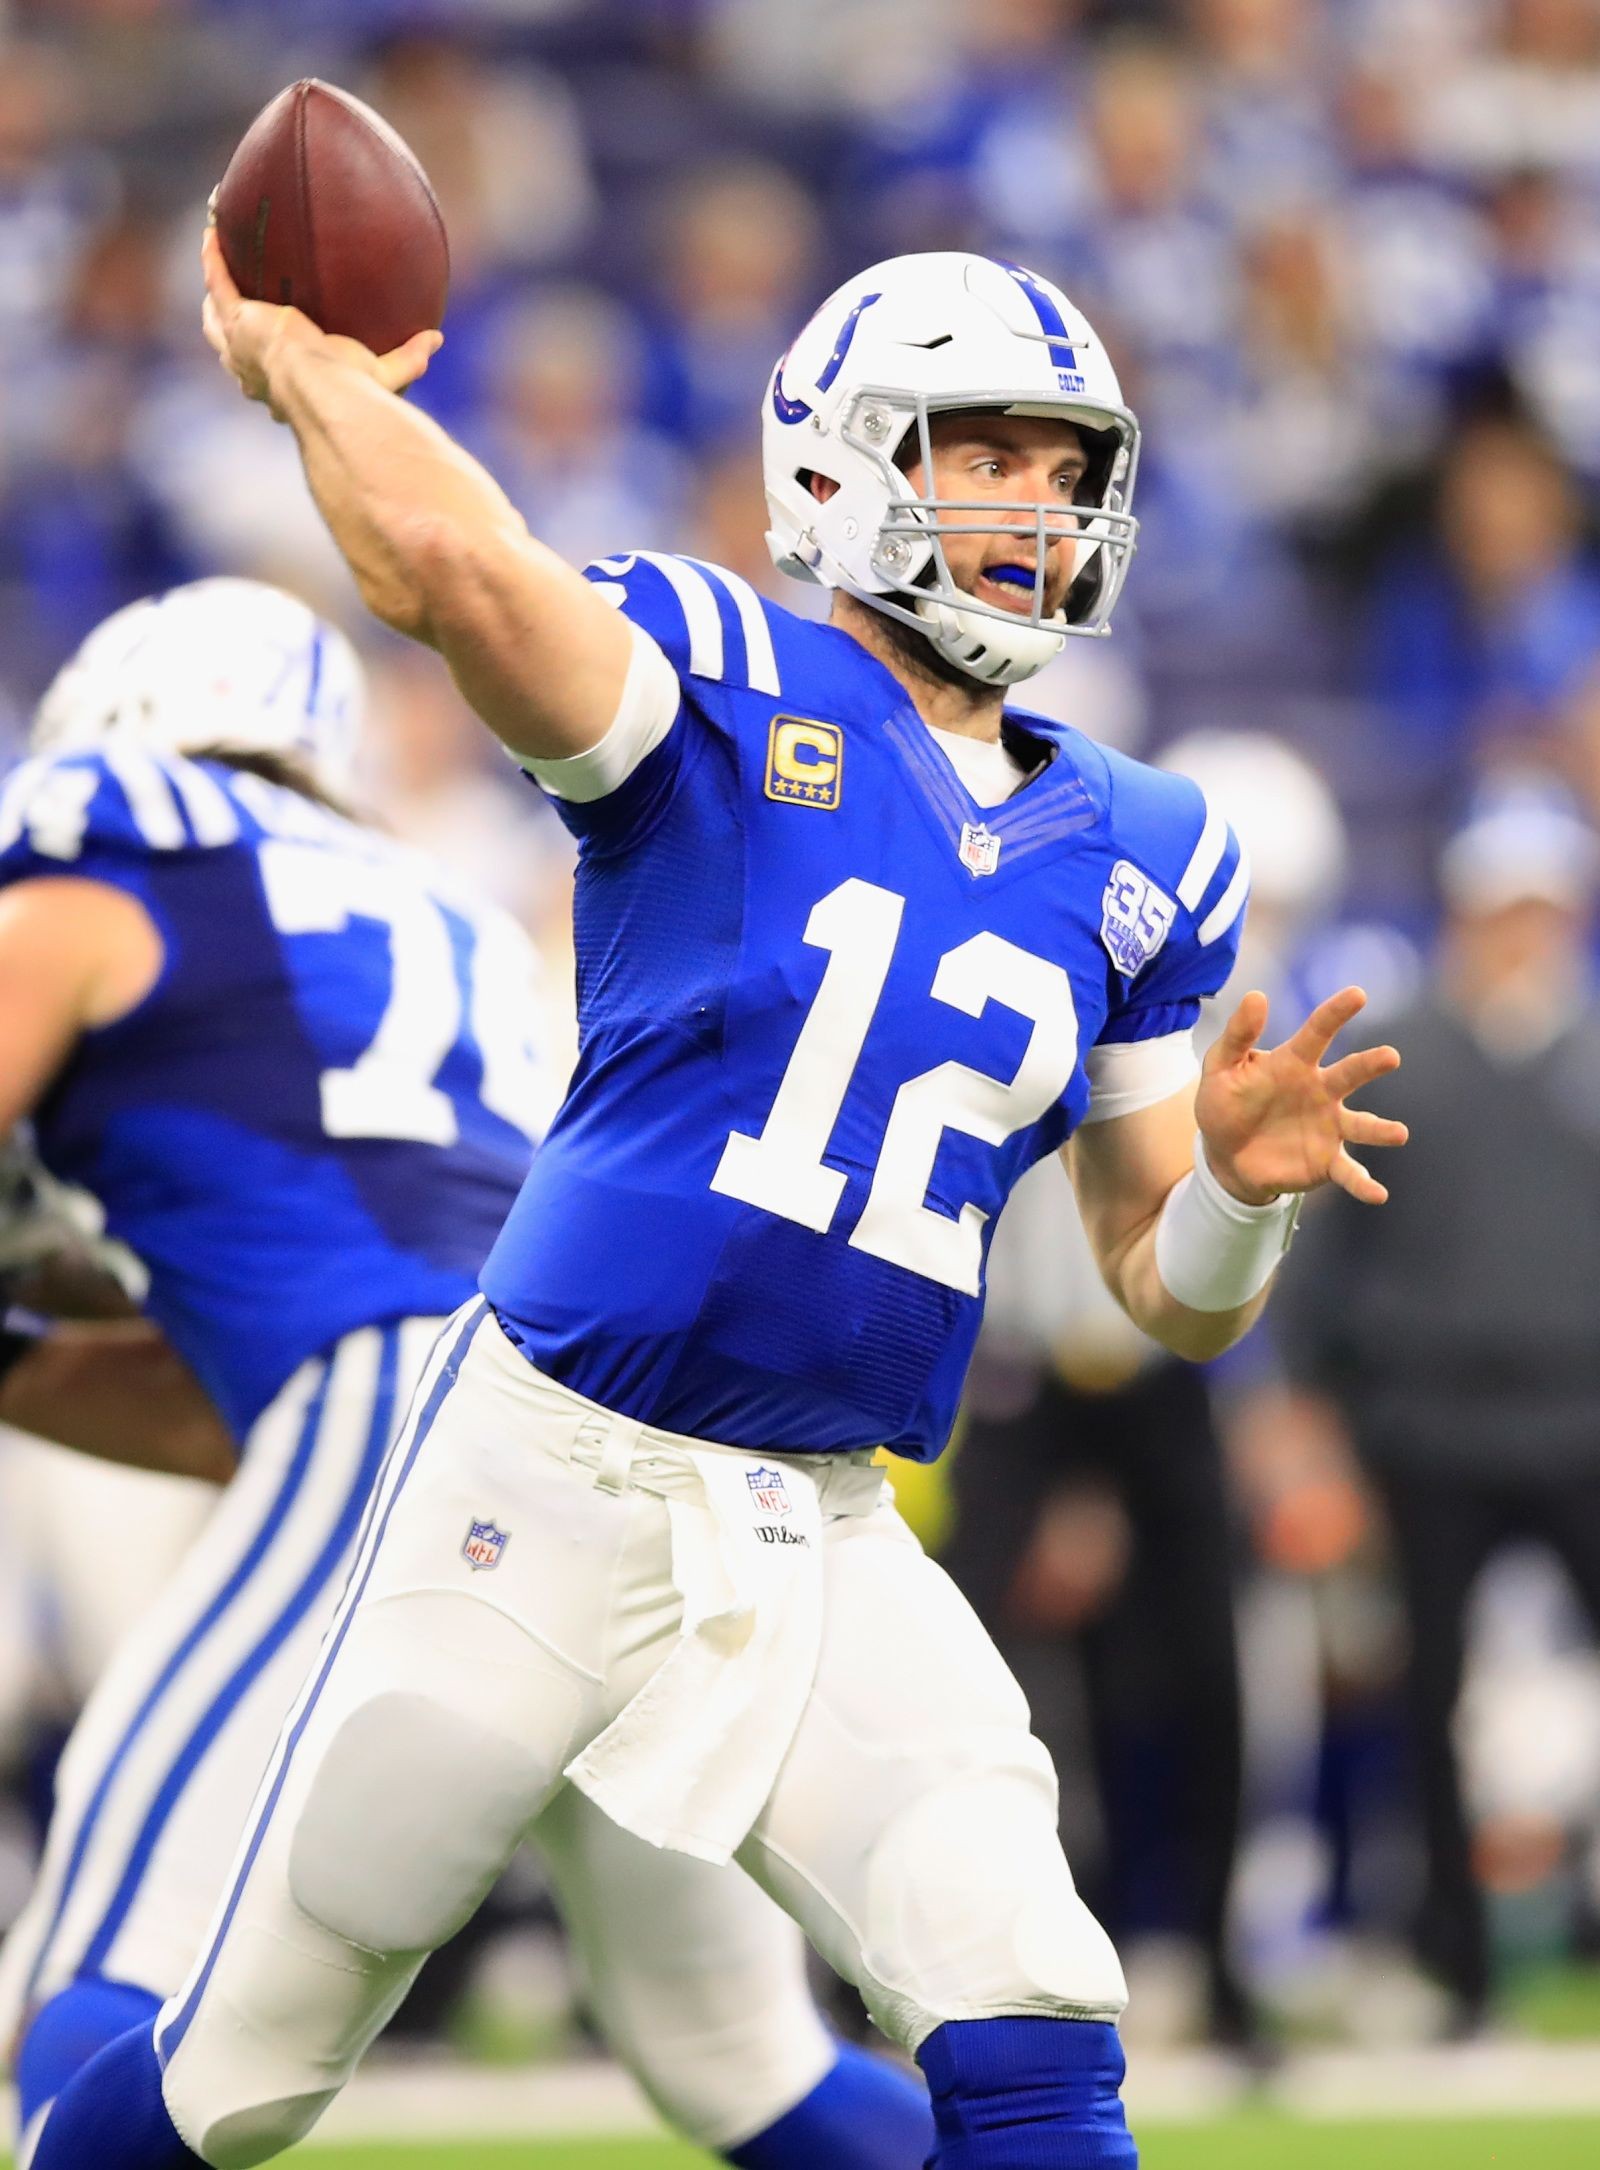 Colts QB Andrew Luck is an MVP candidate